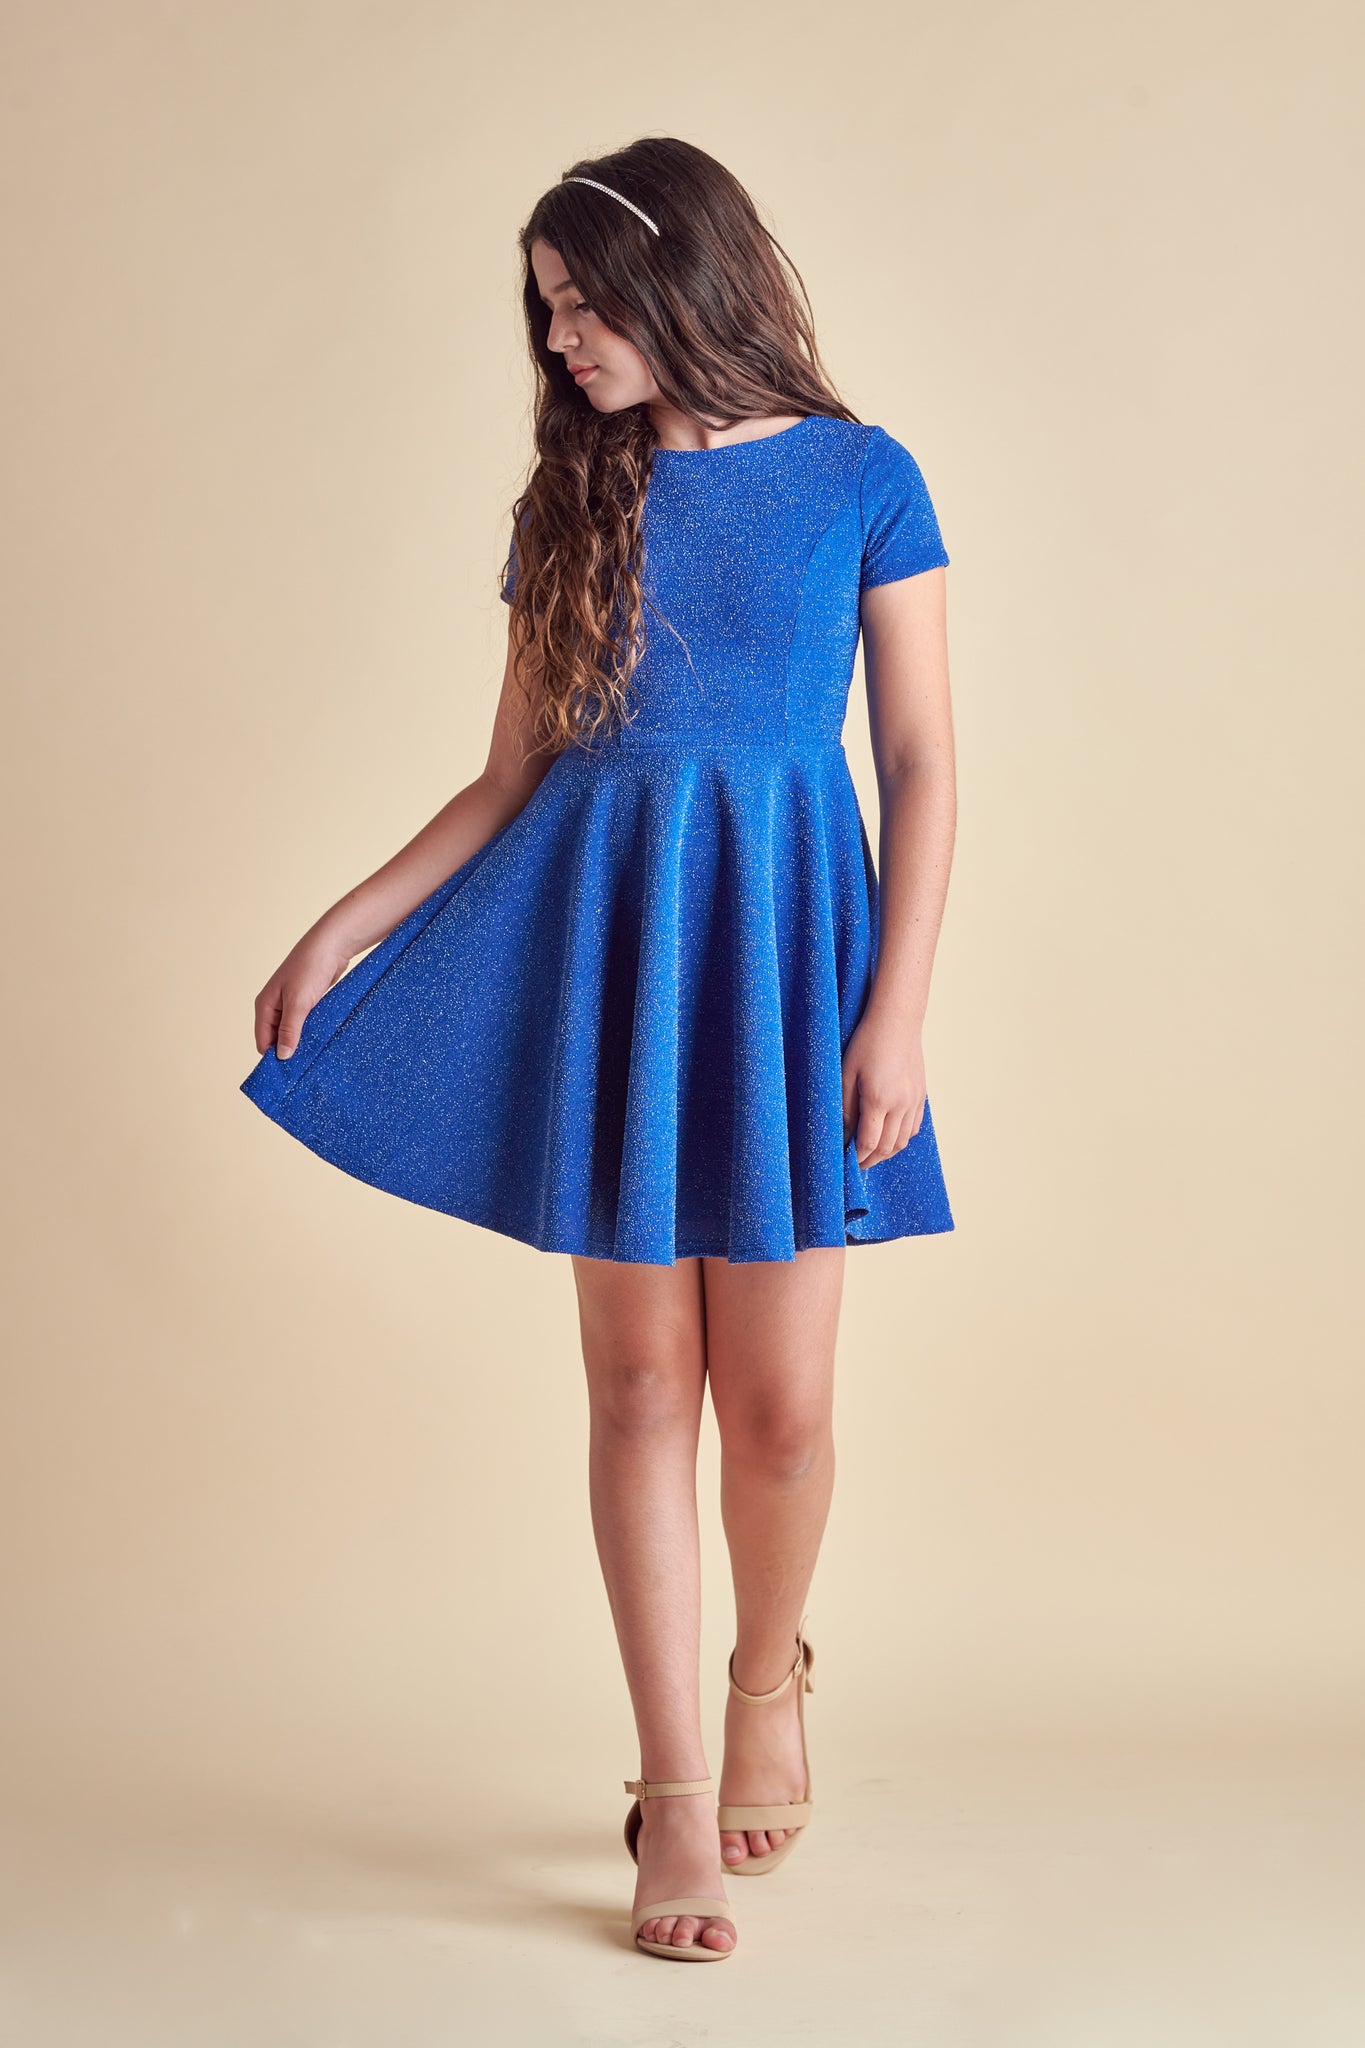 This is an all over cobalt stretch glitter dress made with soft lining. It's non-scratch fabric is a perfect dress that hits right above the knee and has a lower v-back detailing.